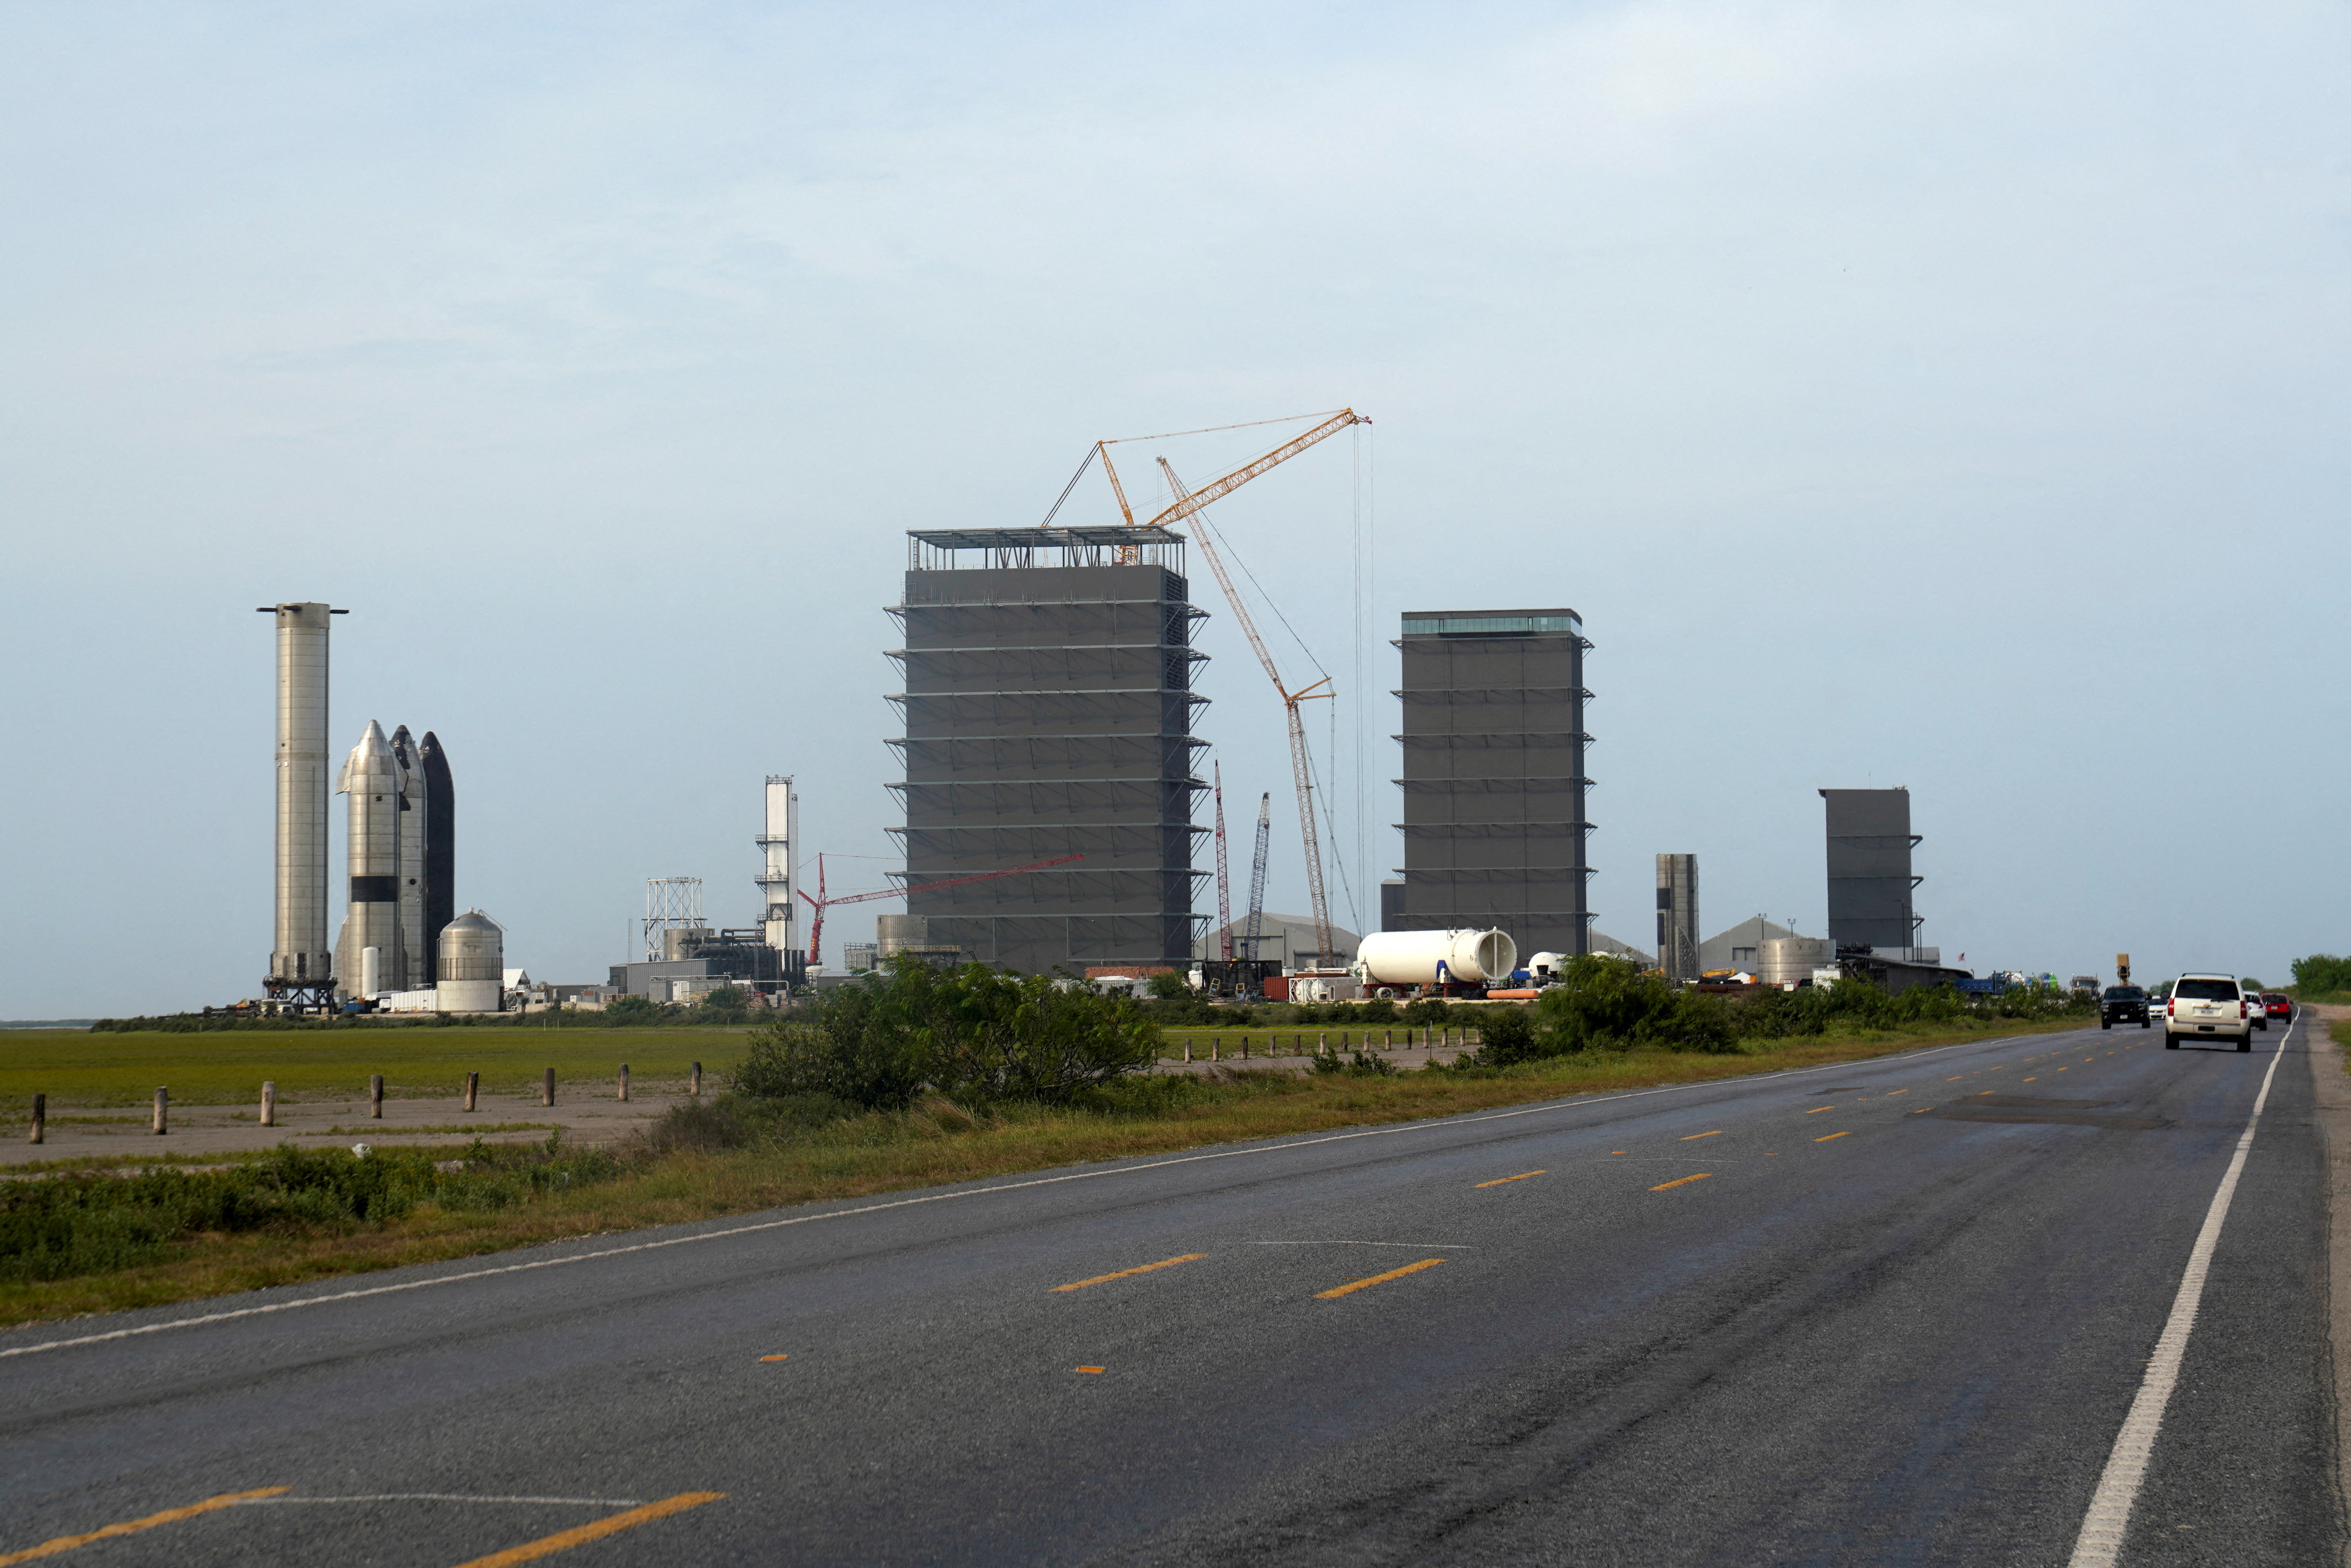 Starship prototypes are pictured at the SpaceX South Texas launch site in Brownsville, Texas